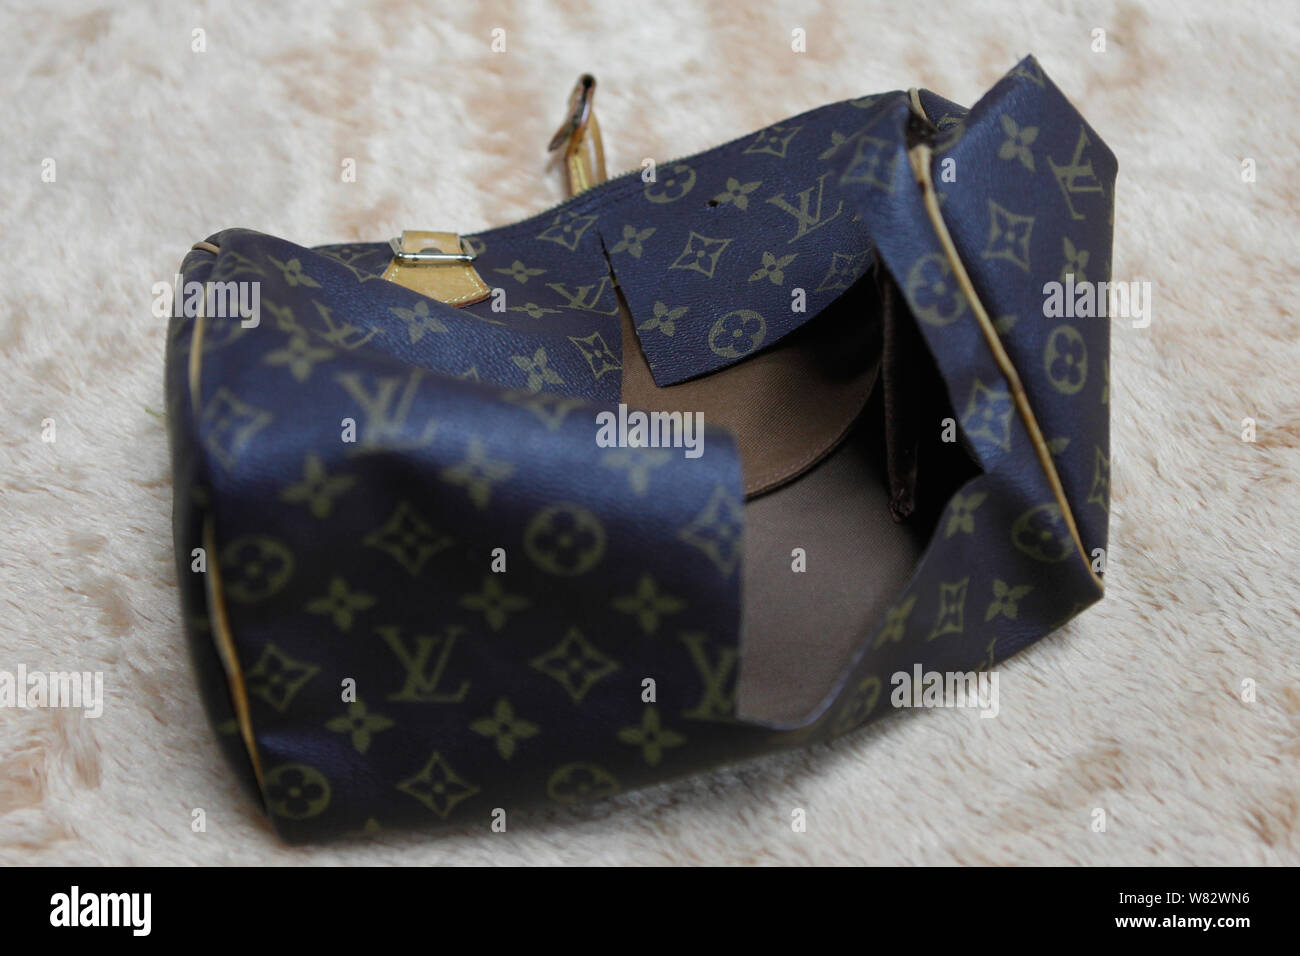 FILE--A fake LV (Louis Vuitton) is destroyed at Asia's largest luxury items center in Beijing, China, 14 June 2016. People have Stock Photo - Alamy